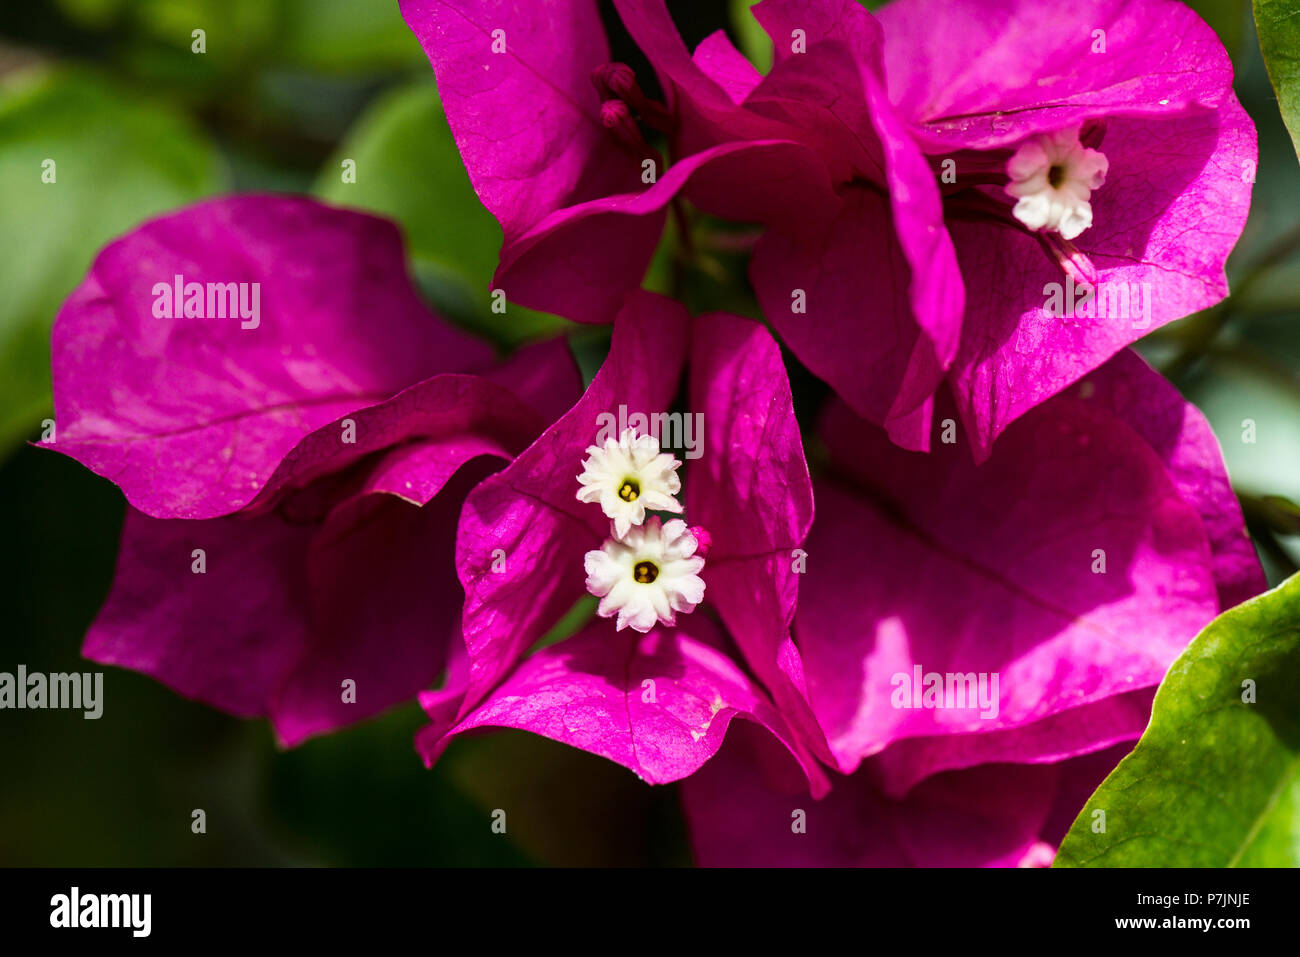 A close up of the white flowers of the lesser bougainvillea (Bougainvillea glabra) surrounded by purple-pink bracts Stock Photo